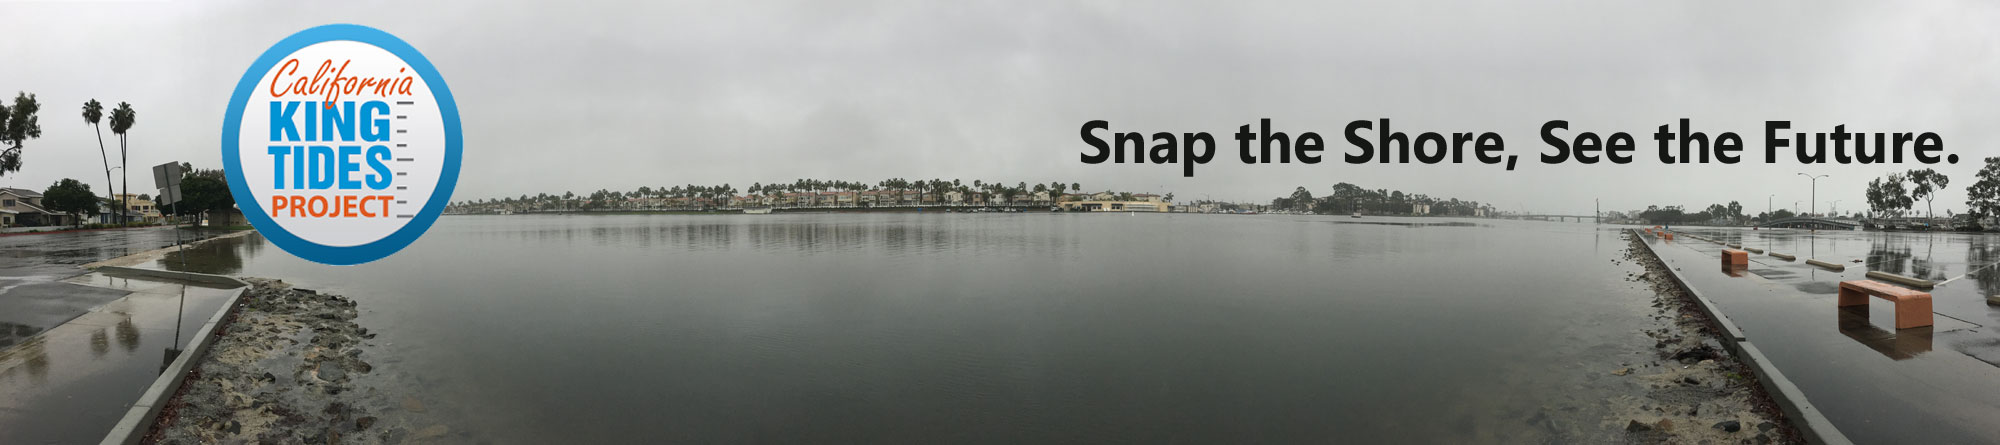 California King Tides Project. Snap the Shore, See the Future. High tide in an urban area.